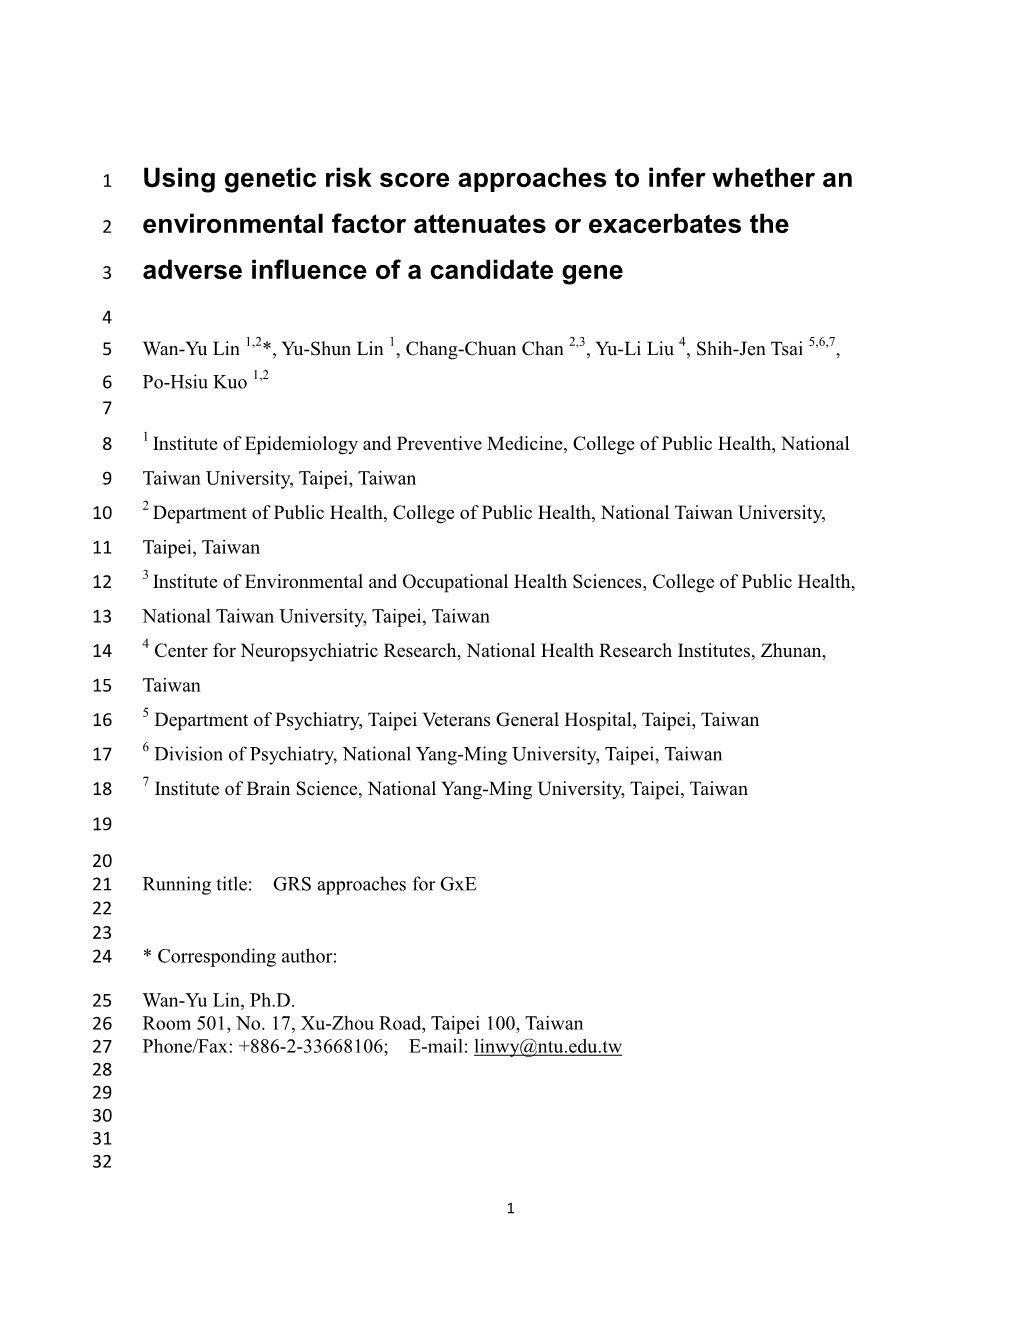 Using Genetic Risk Score Approaches to Infer Whether an Environmental